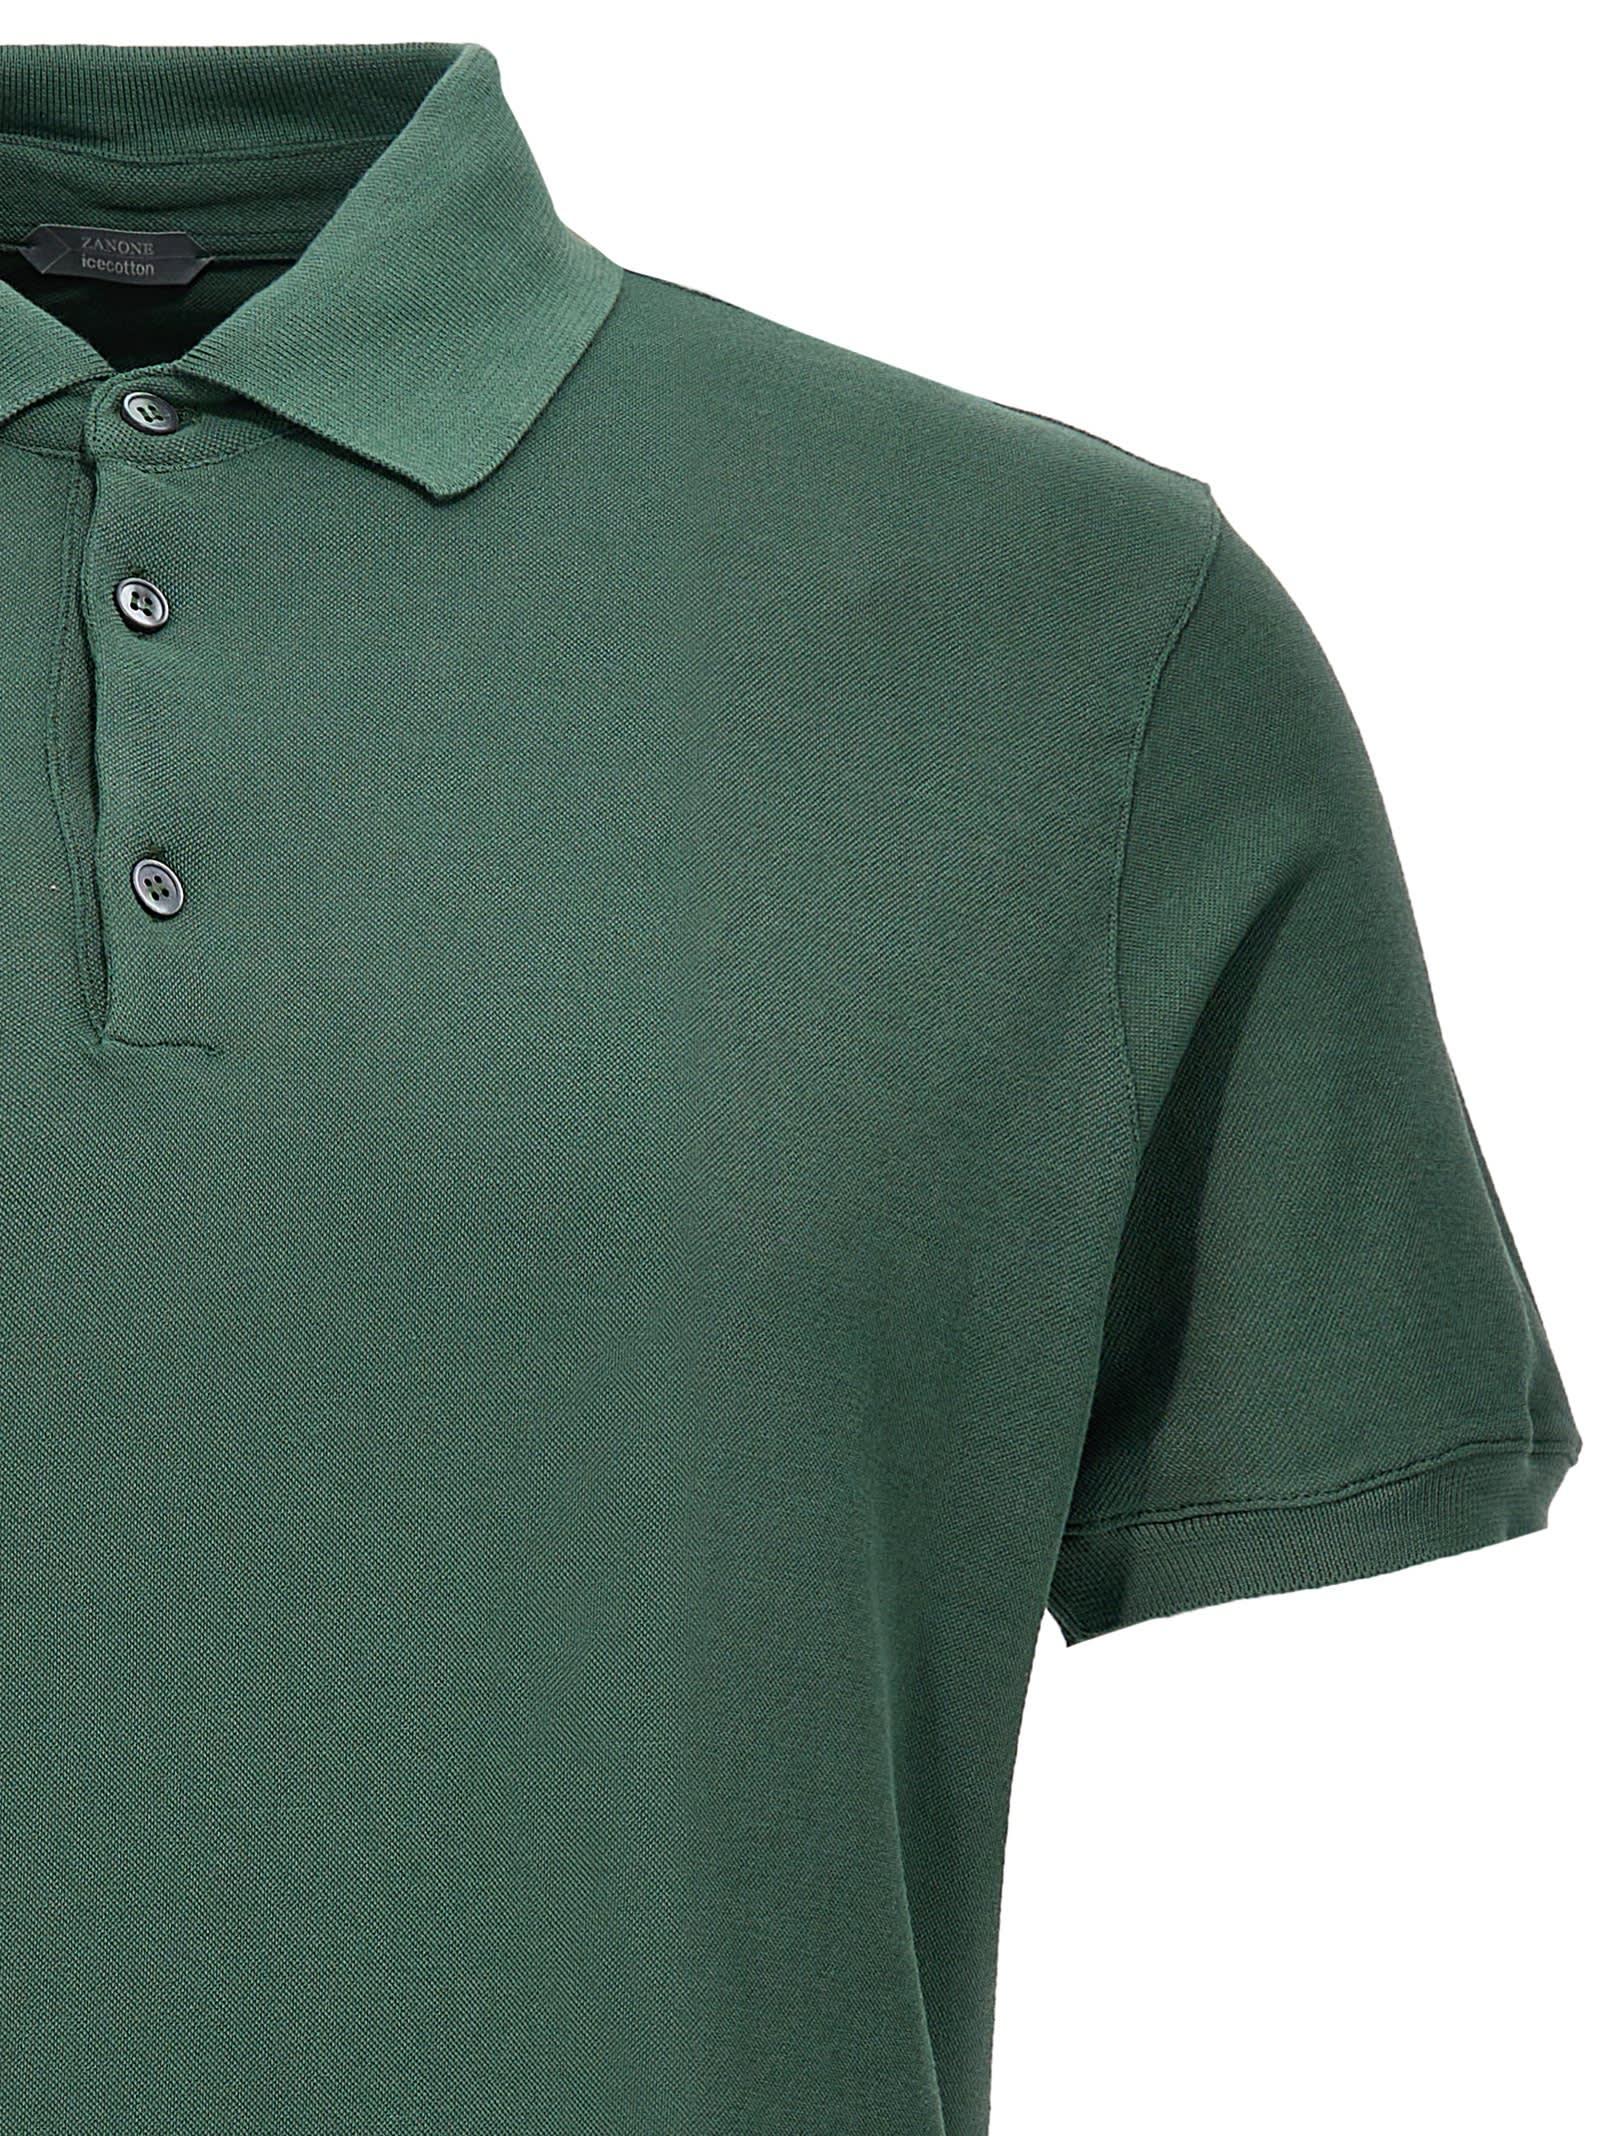 Zanone Cotton Polo Shirt in Green for Men | Lyst